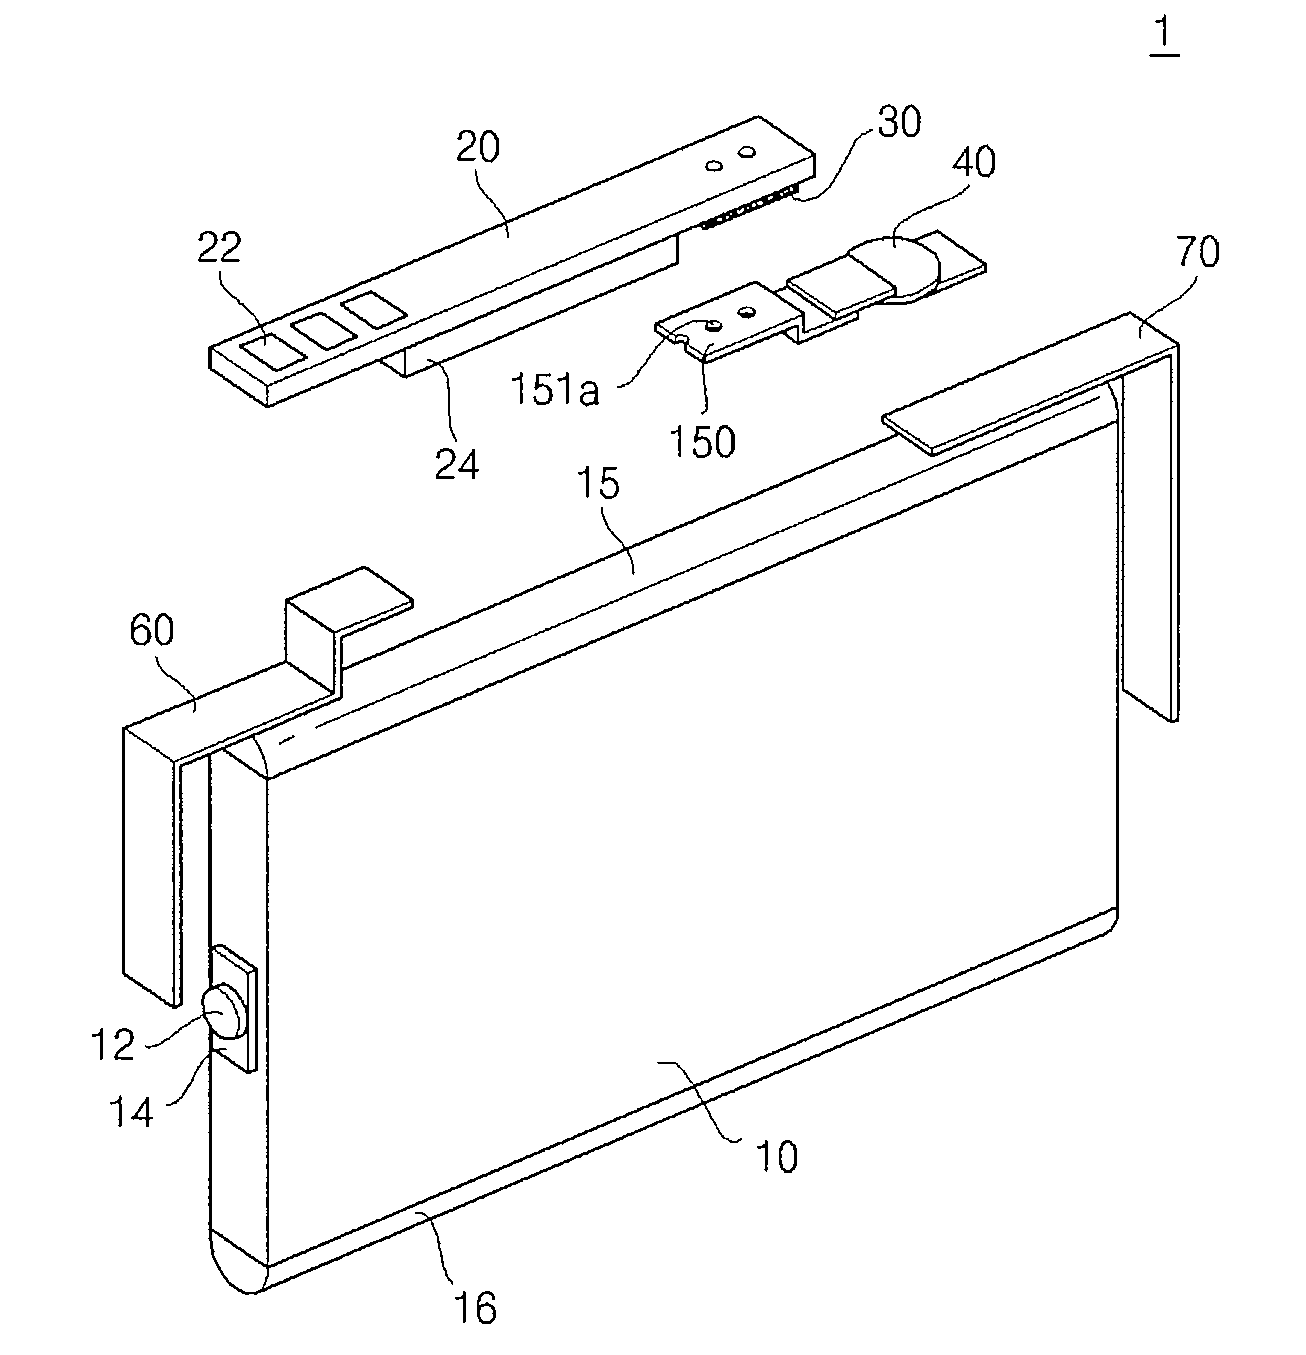 Secondary battery with protective circuit module